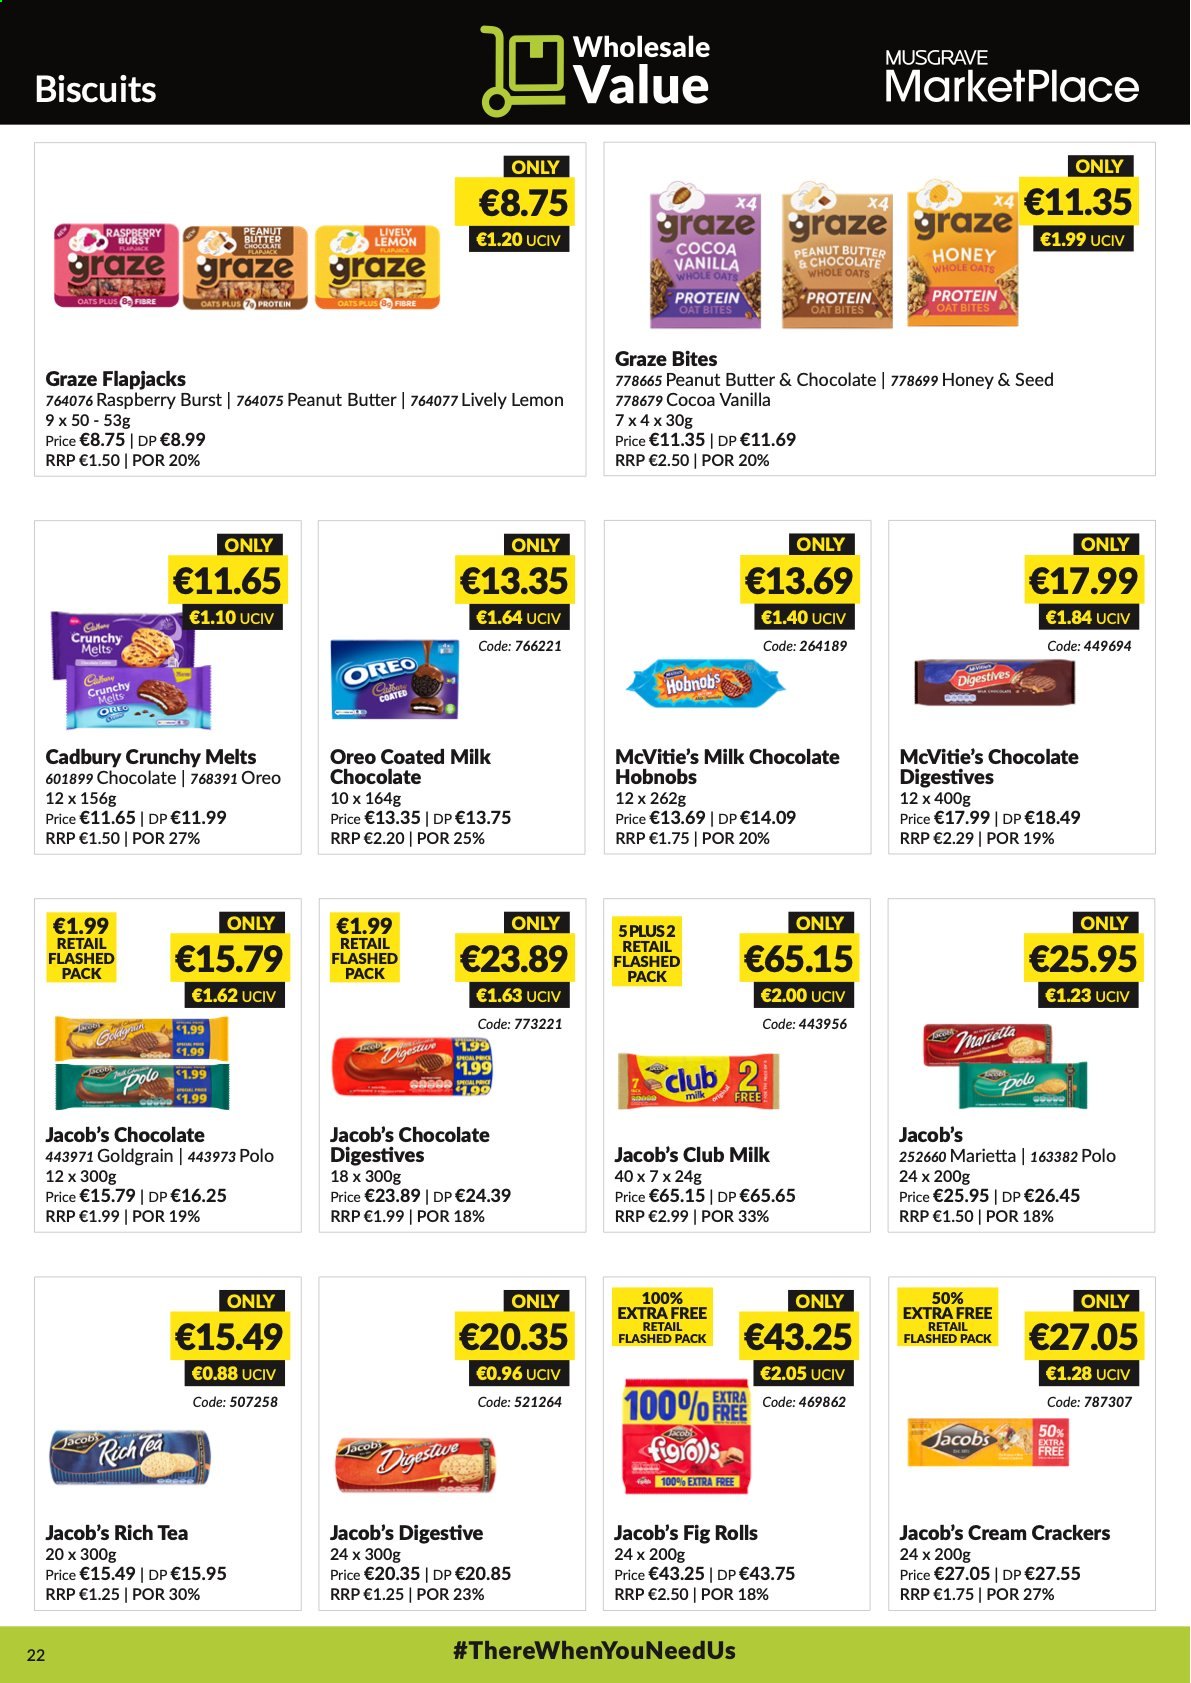 thumbnail - MUSGRAVE Market Place offer  - 04.07.2021 - 31.07.2021 - Sales products - Oreo, milk chocolate, chocolate, crackers, biscuit, club milk, Cadbury, Digestive, oat bites, honey, peanut butter, Graze, tea, Jacobs. Page 22.